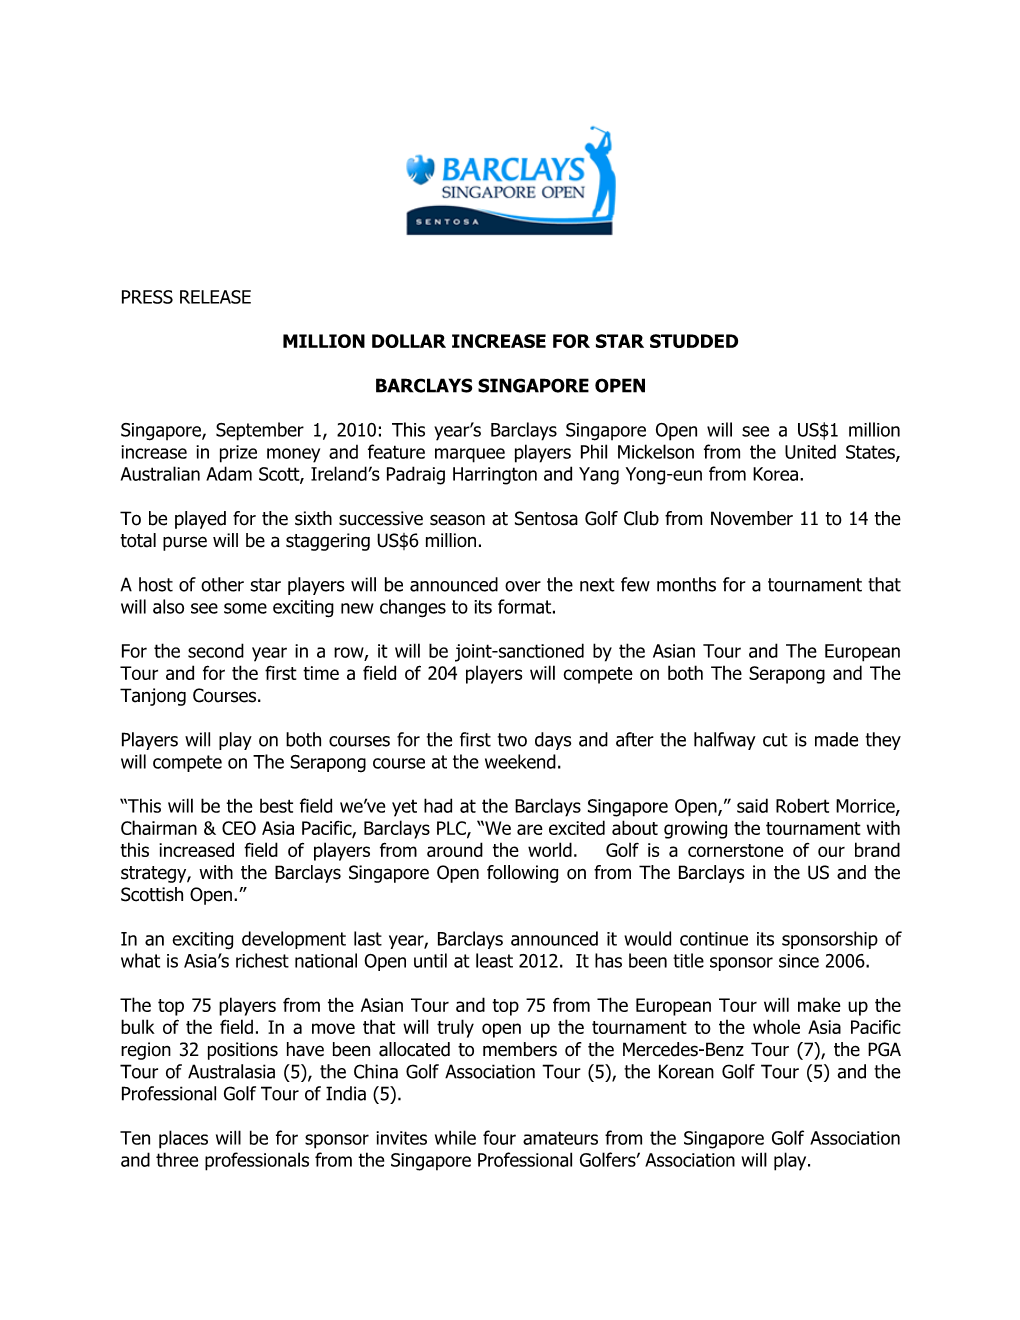 PRESS RELEASE MILLION DOLLAR INCREASE for STAR STUDDED BARCLAYS SINGAPORE OPEN Singapore, September 1, 2010: This Year's Barc